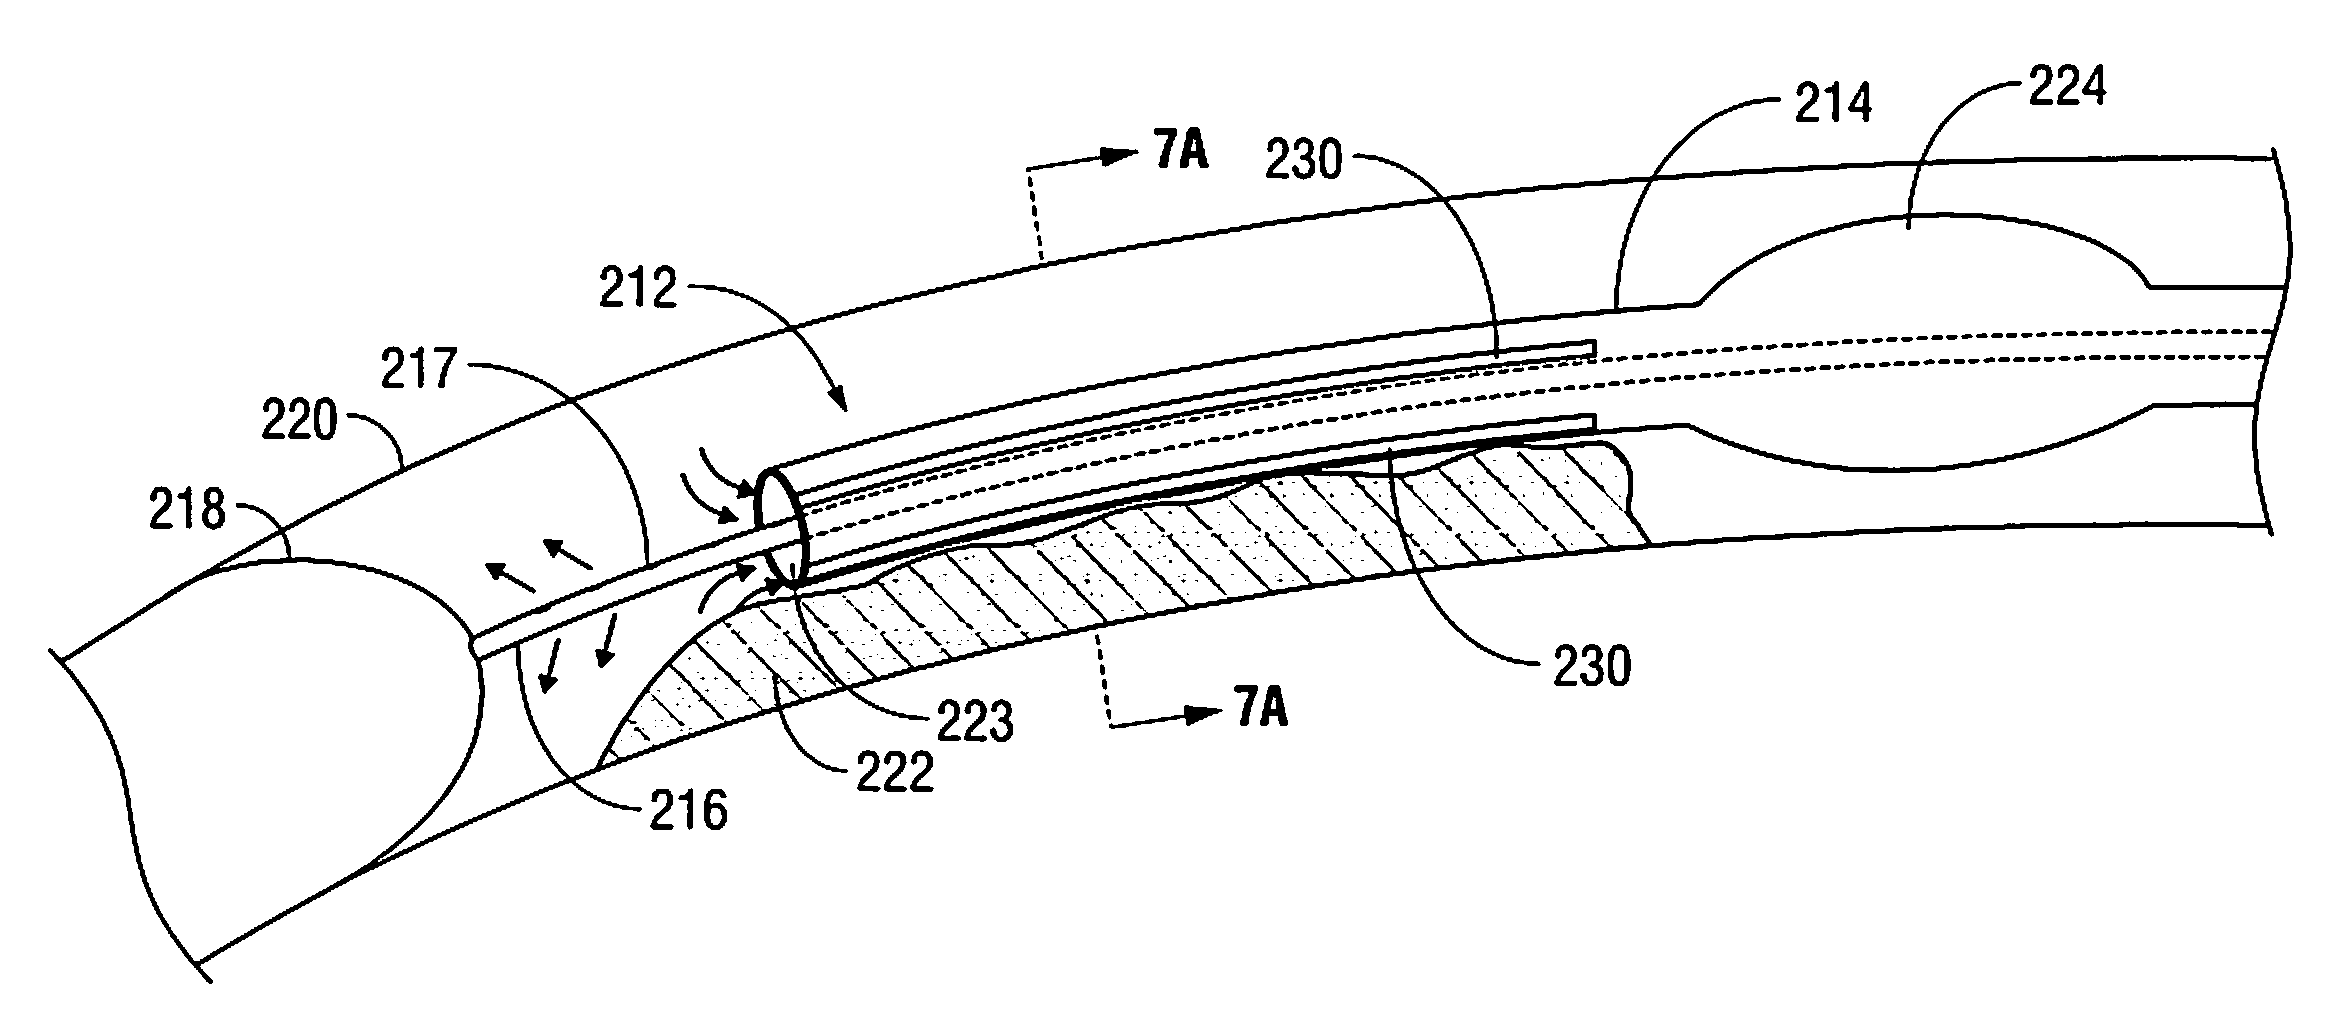 Endovascular Tissue Removal Device